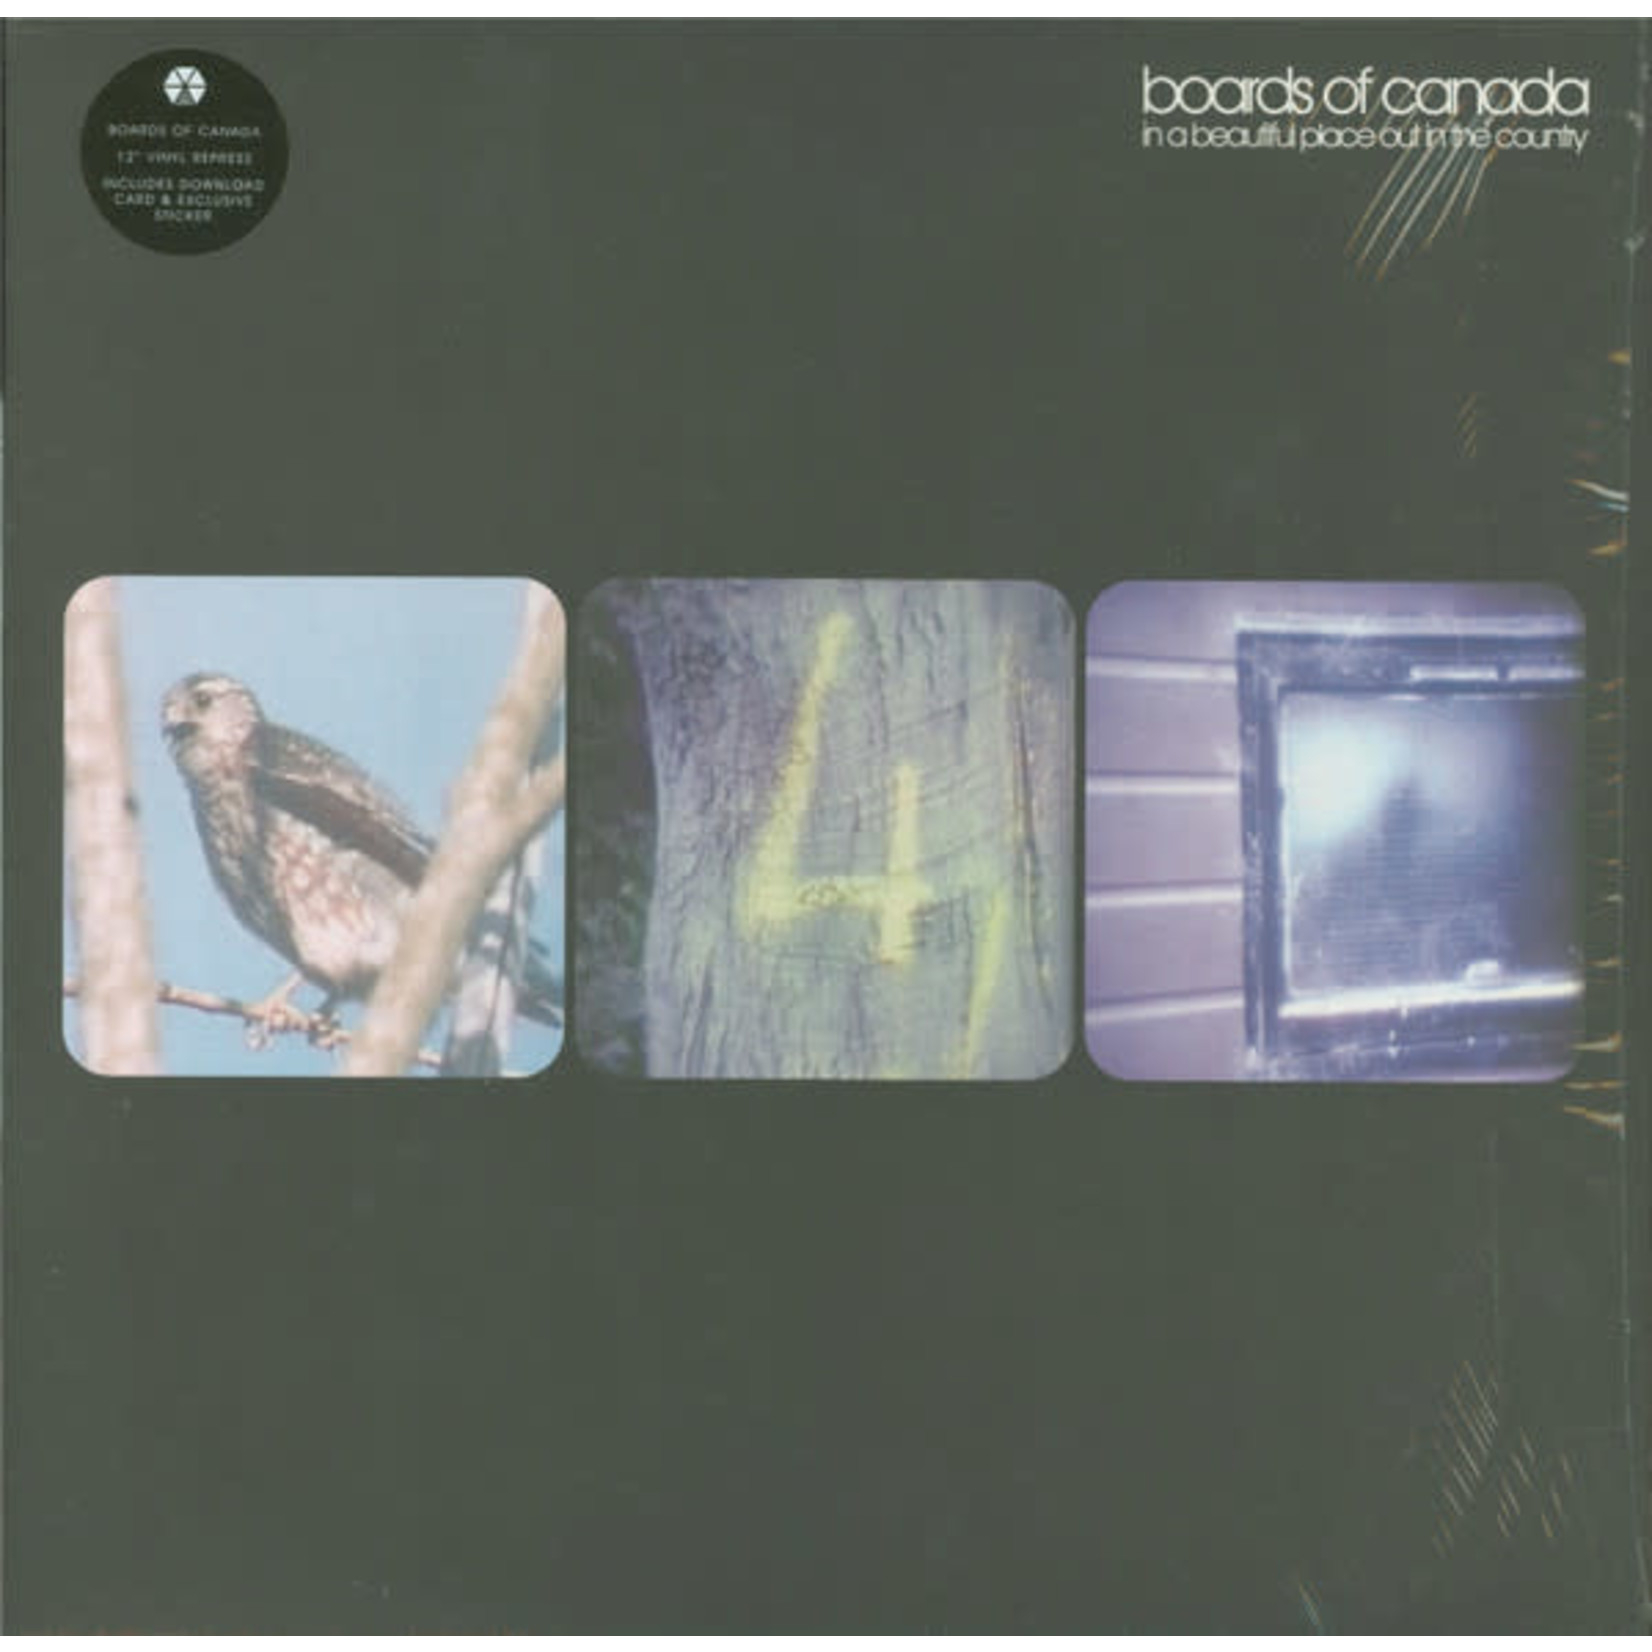 Boards Of Canada – In A Beautiful Place Out In The Country (LP, New)